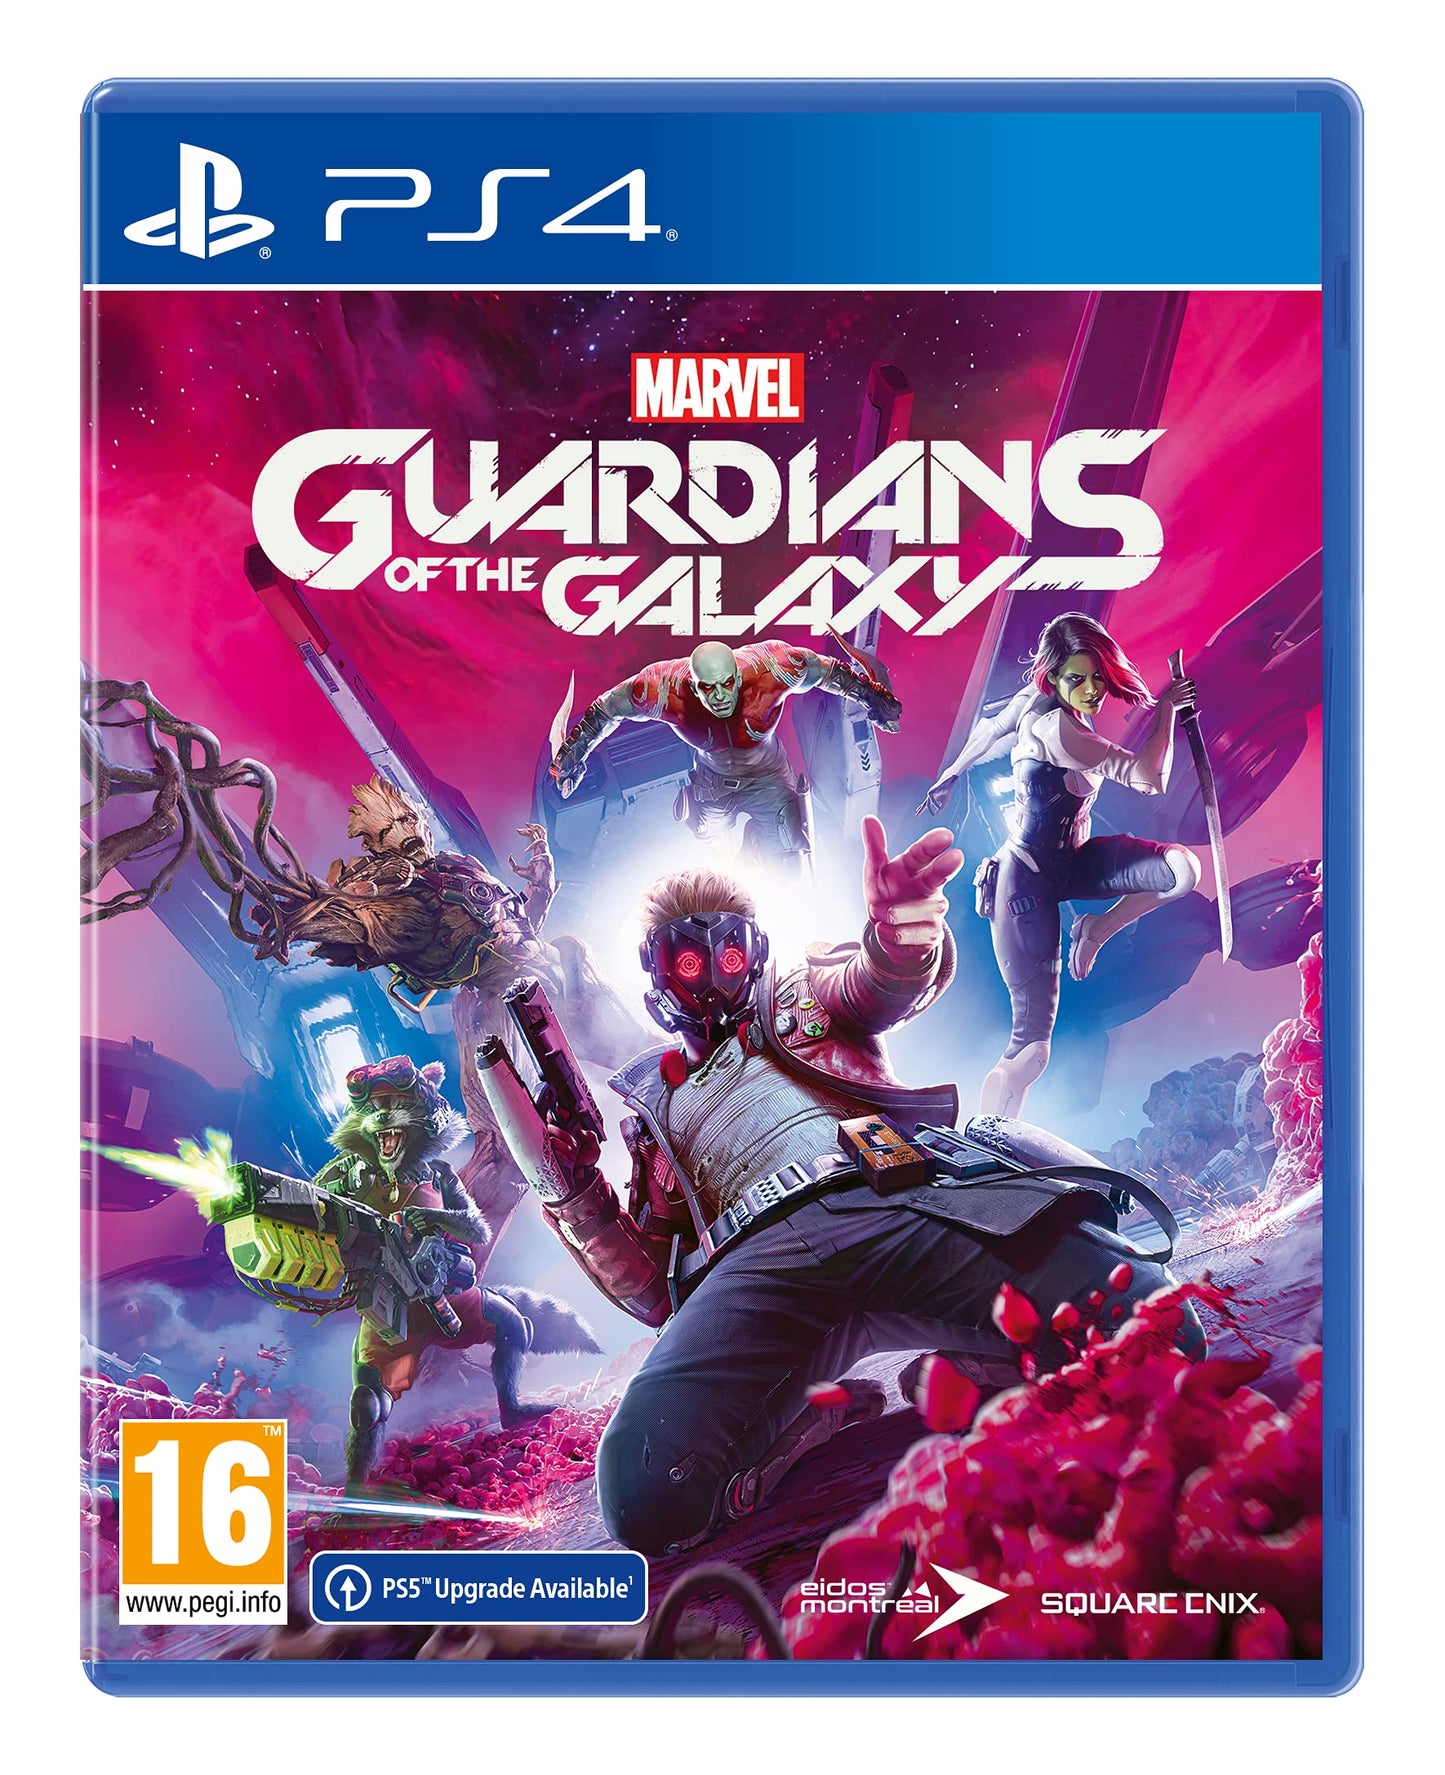 MARVELS GUARDIANS OF THE GALAXY PS4 OYUN